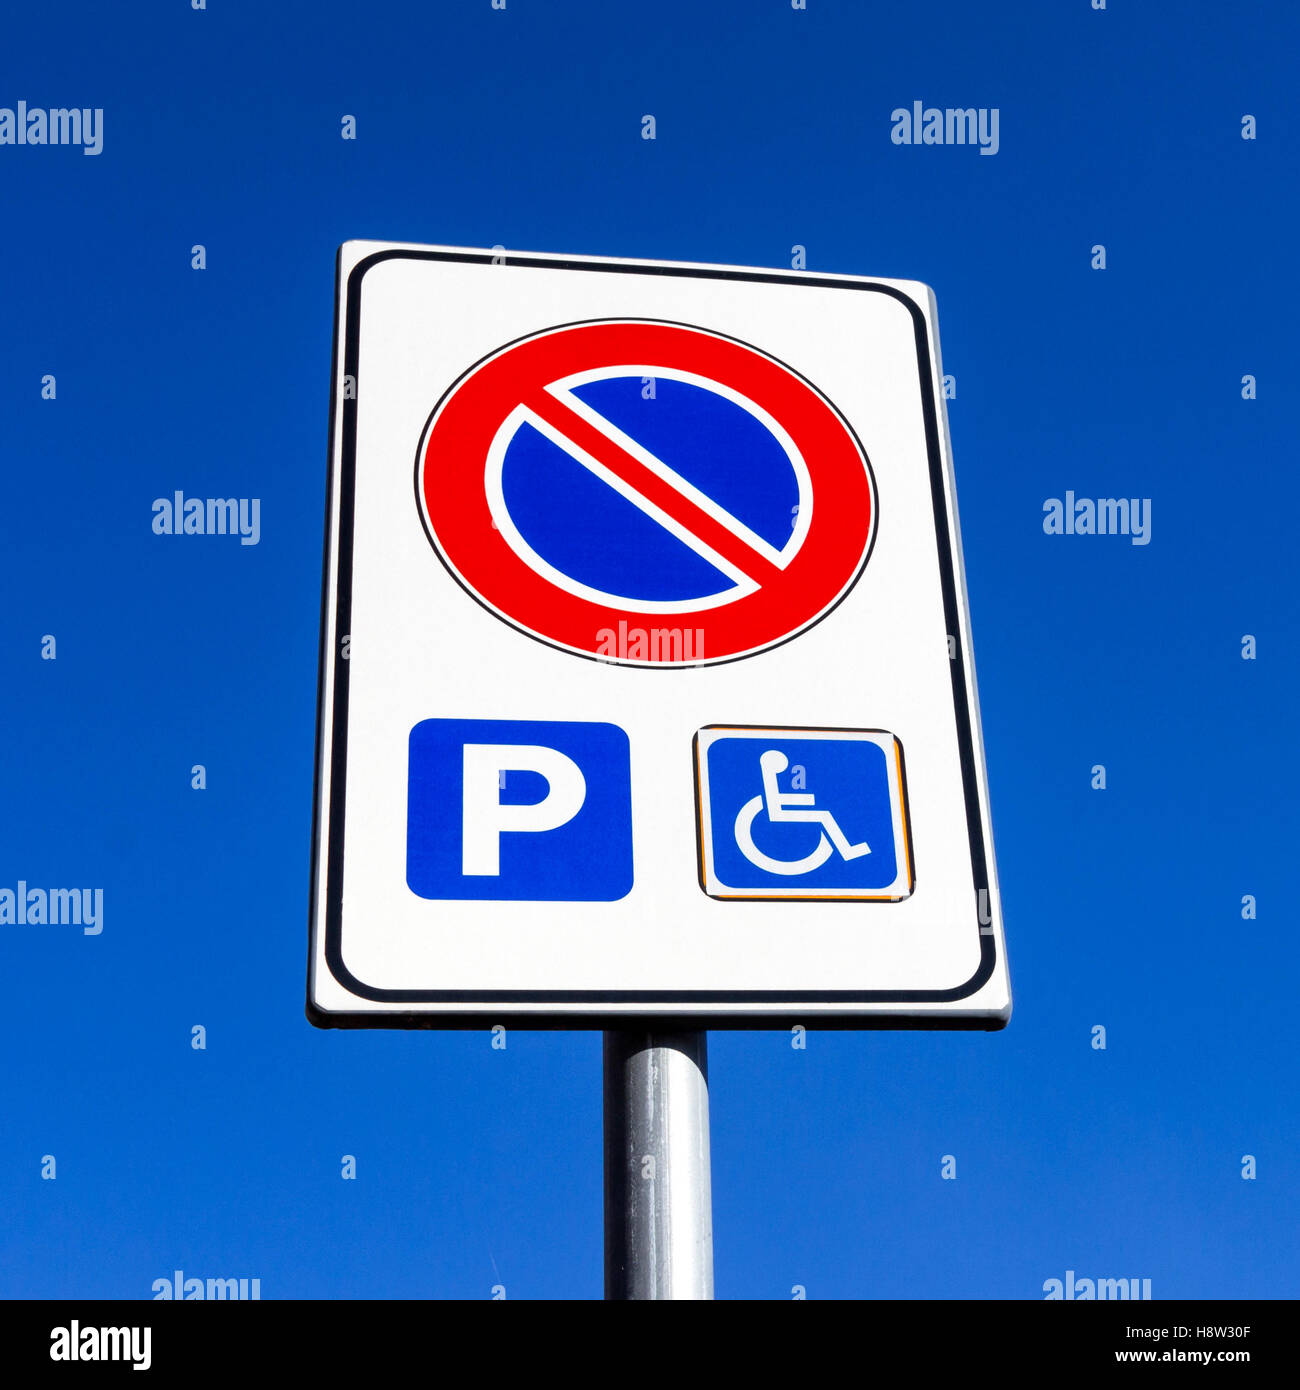 Handicap parking only sign for disabled drivers Stock Photo